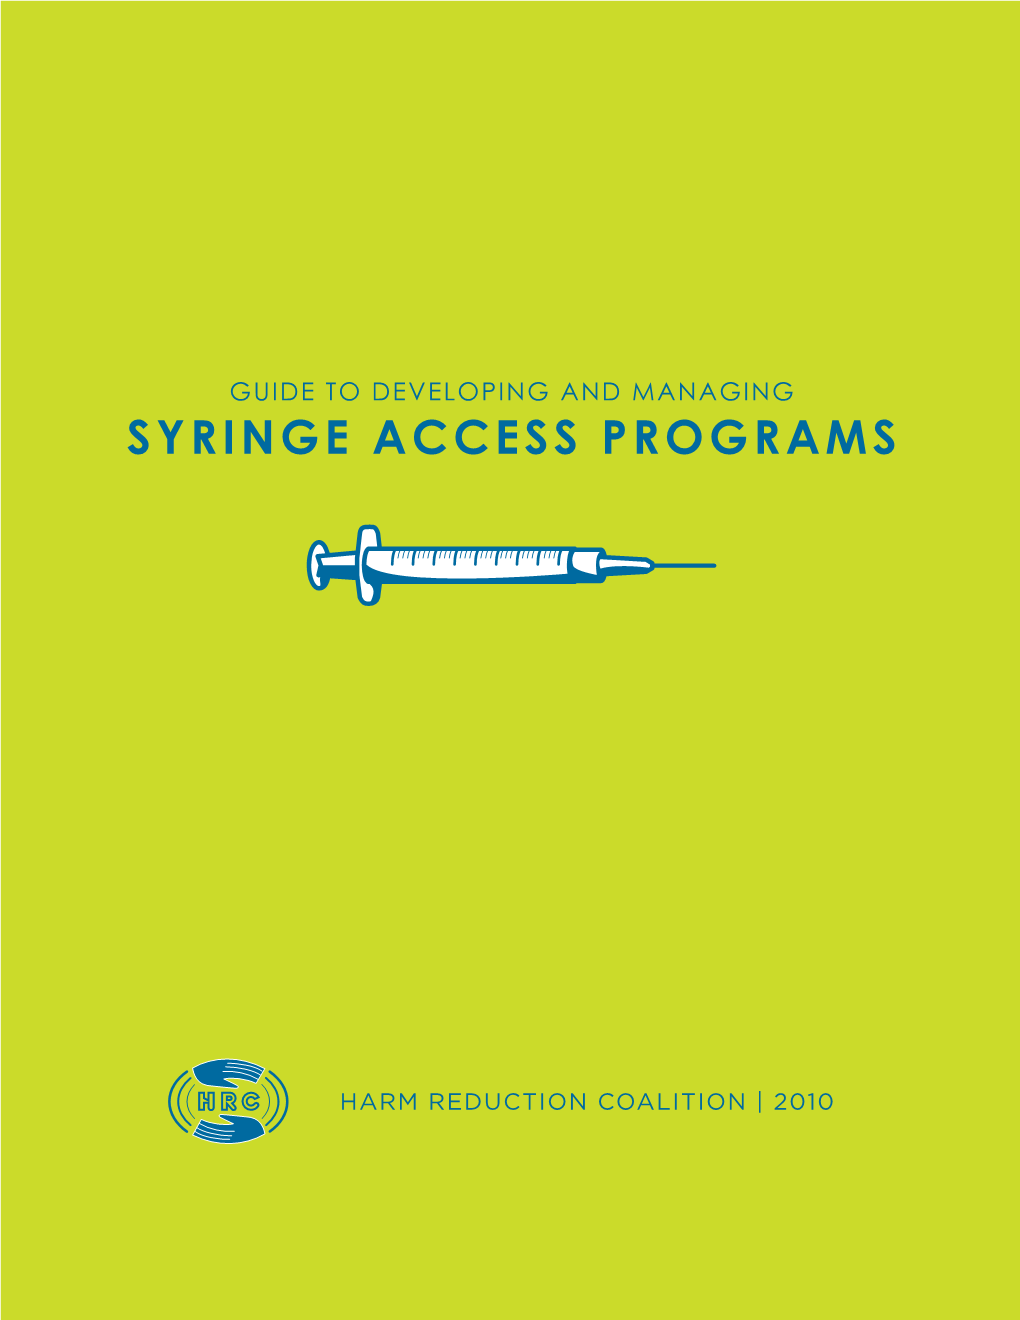 Guide to Developing & Managing Syringe Access Programs